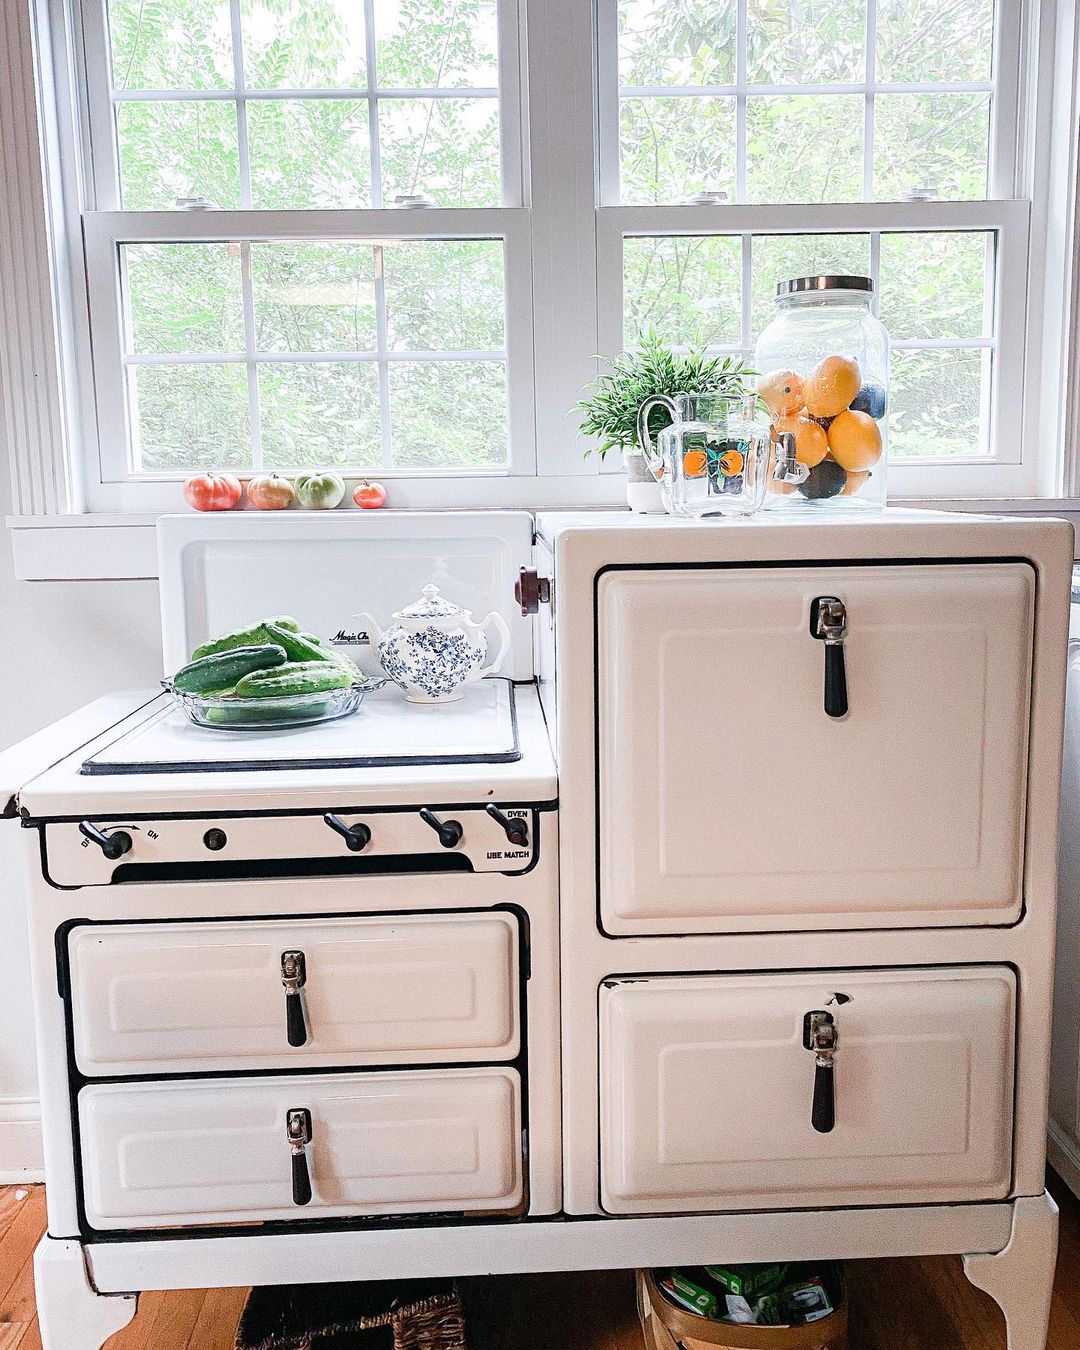 Classic Stove and Oven in a Farmhouse Kitchen. Photo by Instagram user @thecarolinafarmhouse